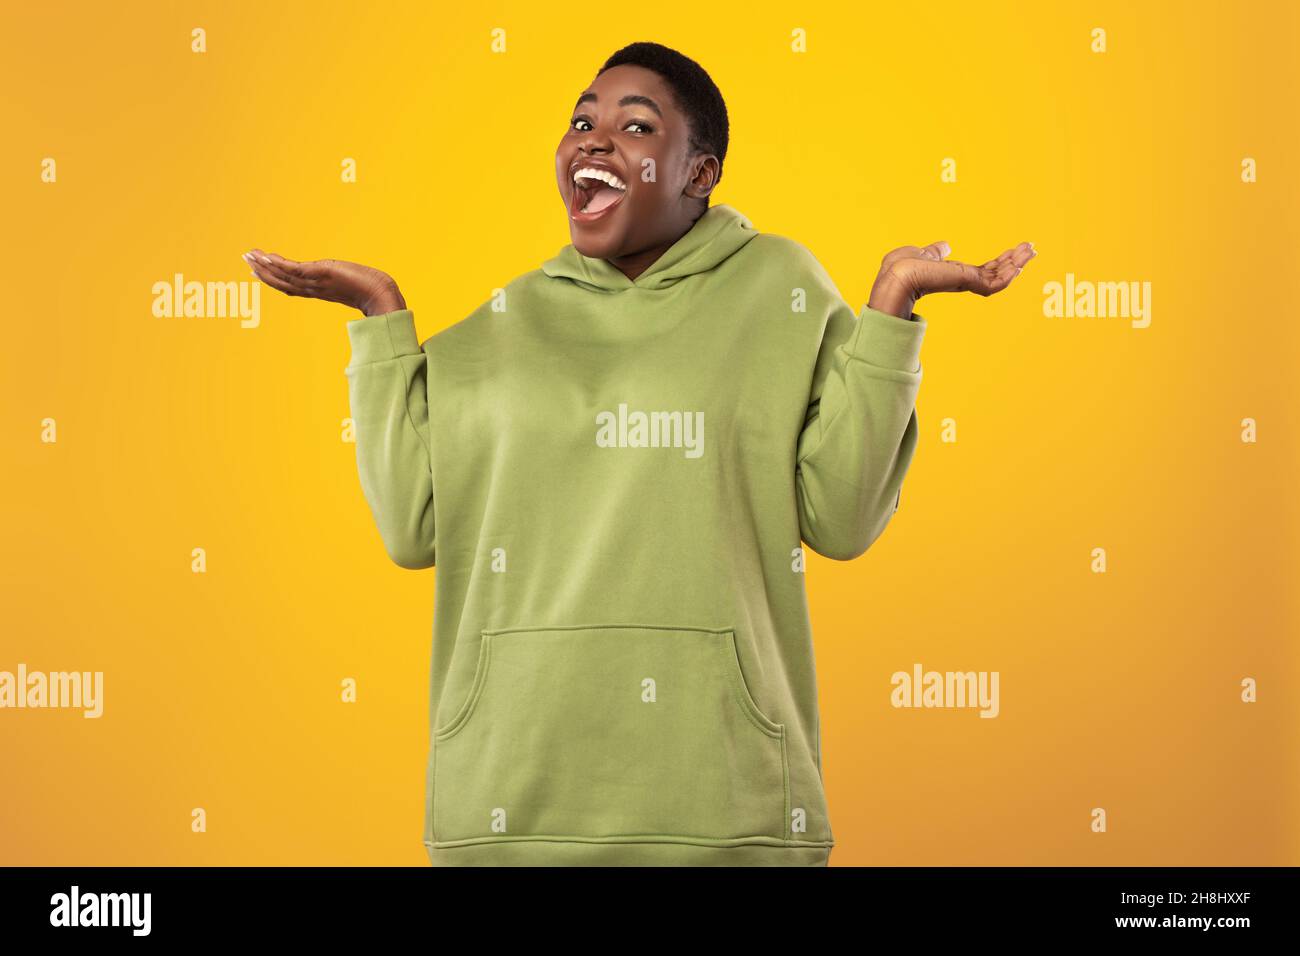 Cheerful Black Overweight Lady Shrugging Shoulders Posing On Yellow Background Stock Photo